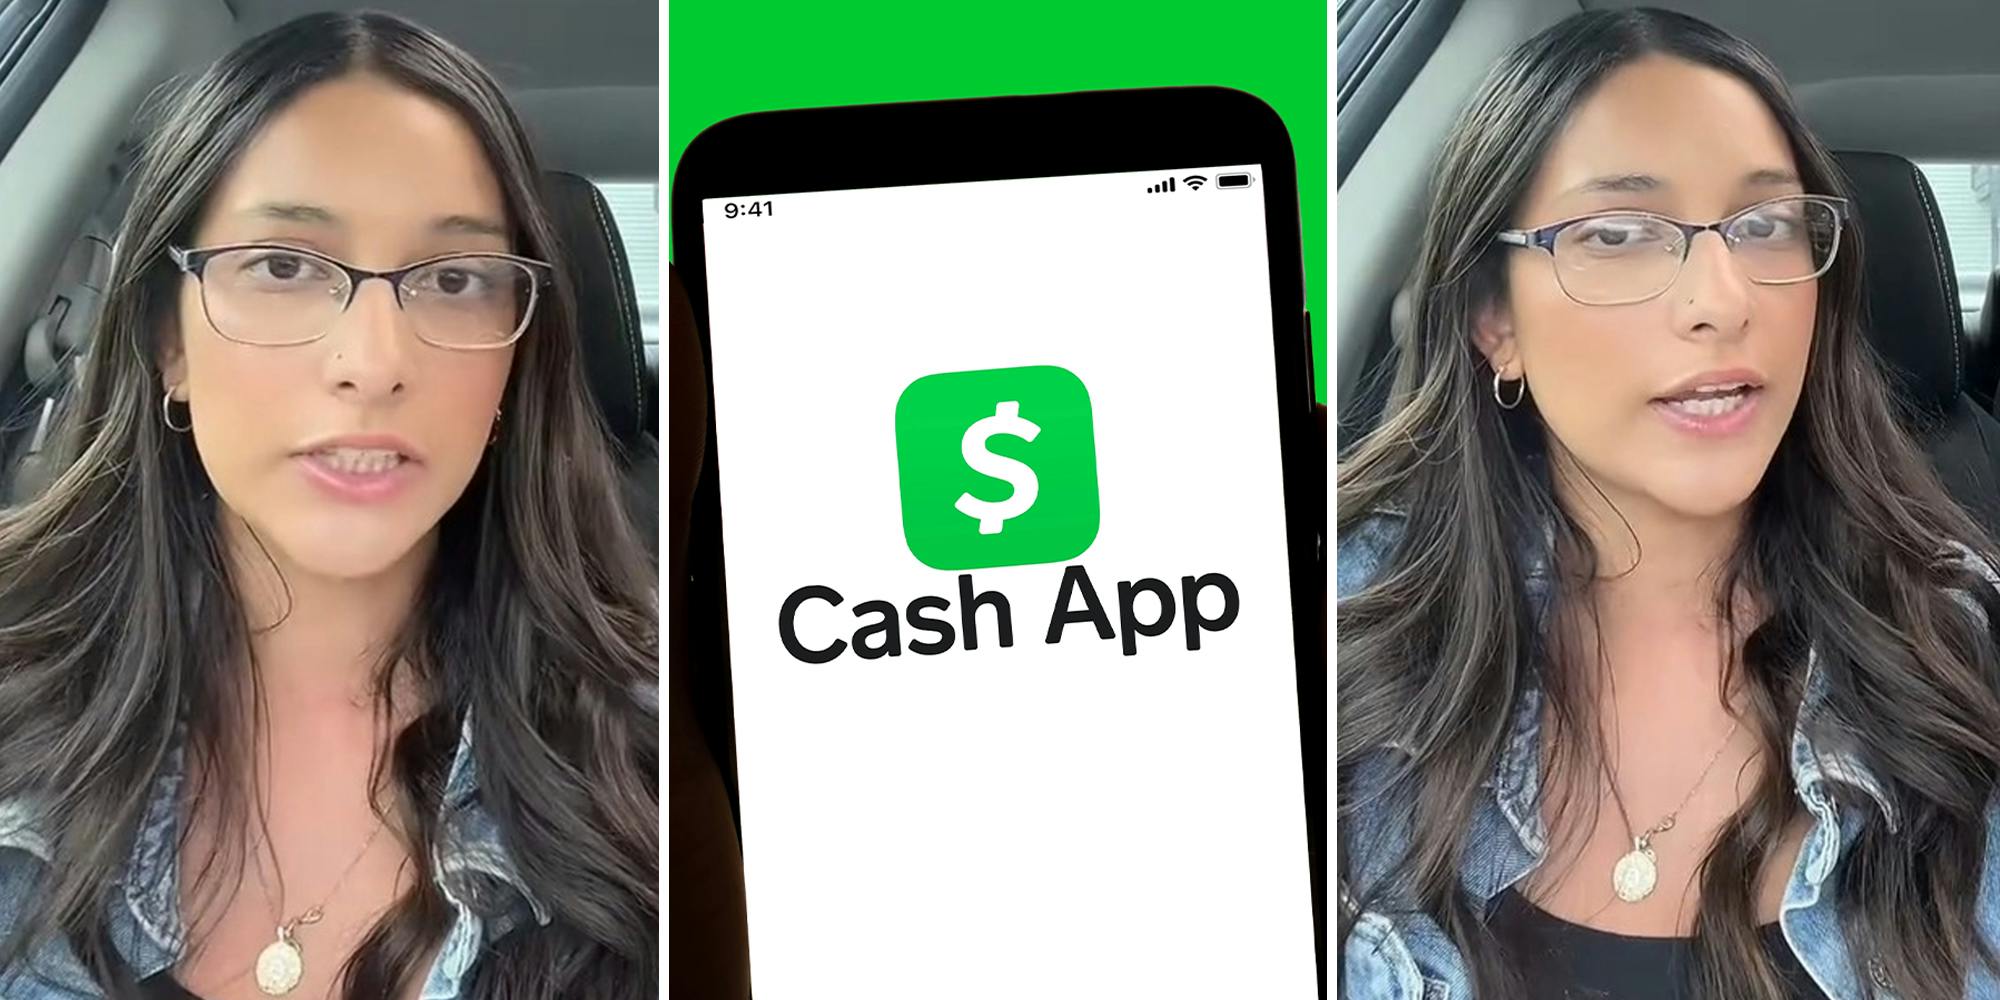 Woman gets ‘treated’ to lunch by co-worker. Then, she sends a Cash App request